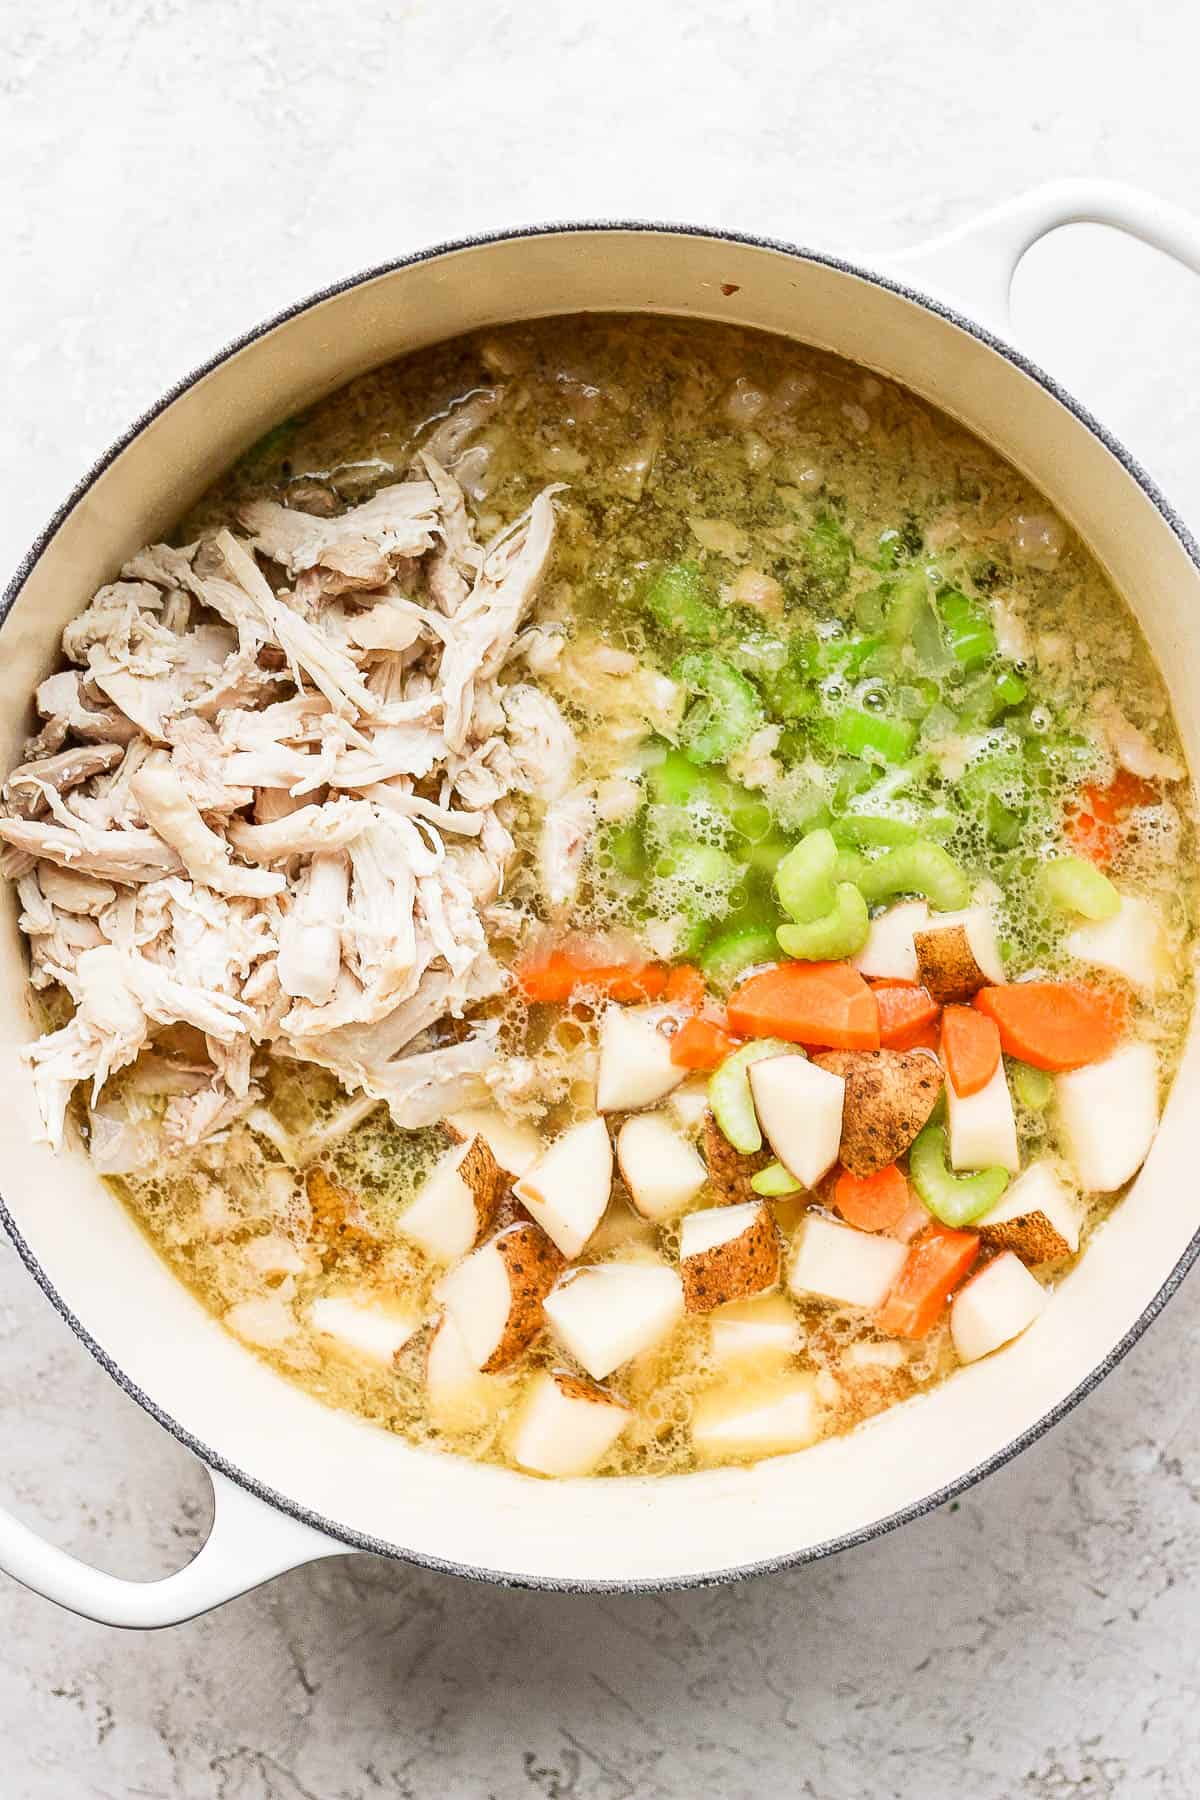 Vegetables and shredded chicken added to the pot.